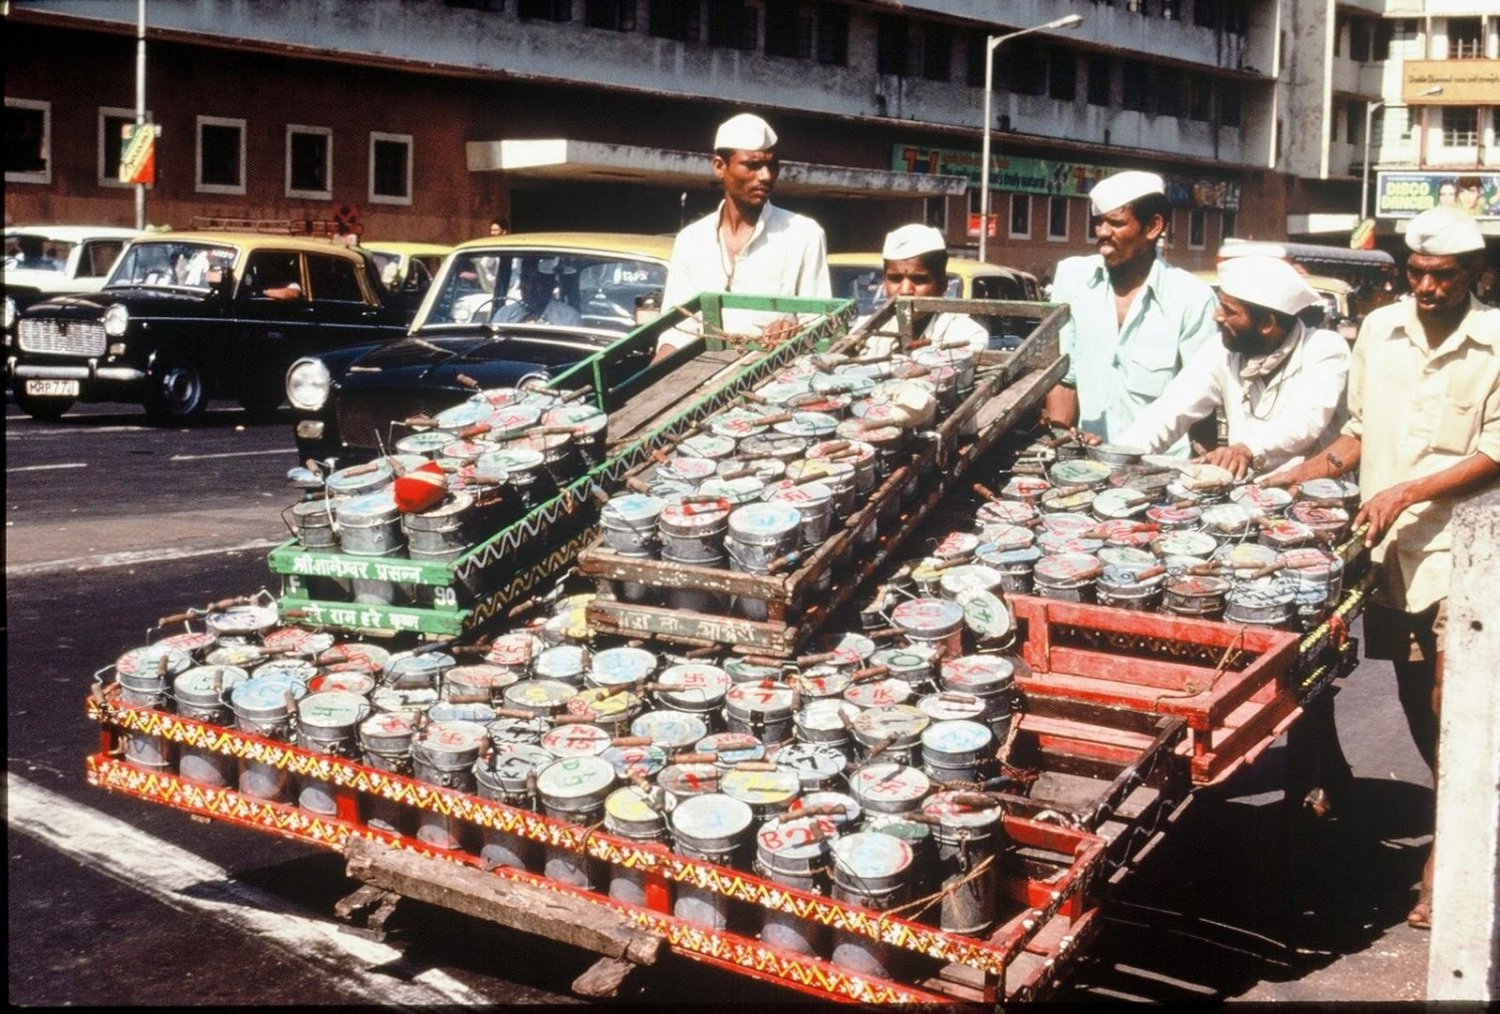 Dabbawala services - so many containers! 